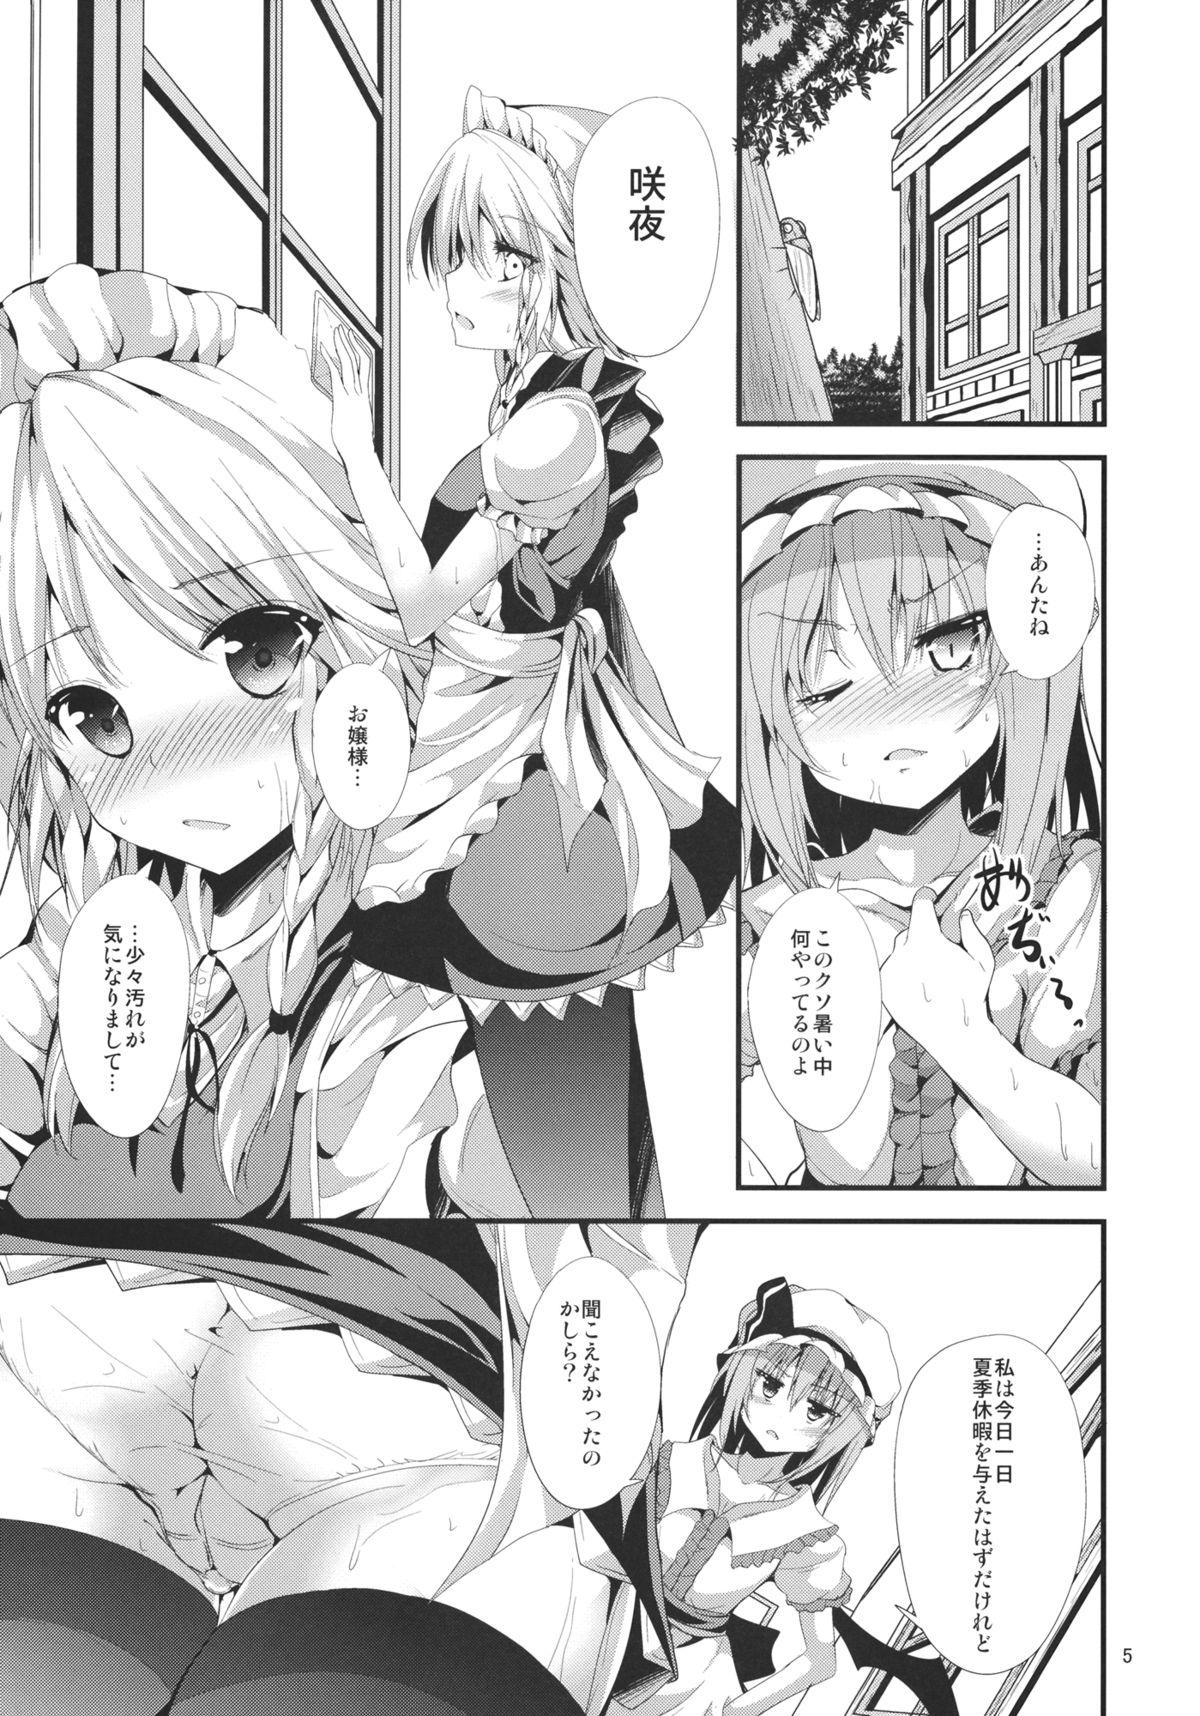 Boobs Summer vacation - Touhou project Big Butt - Page 2